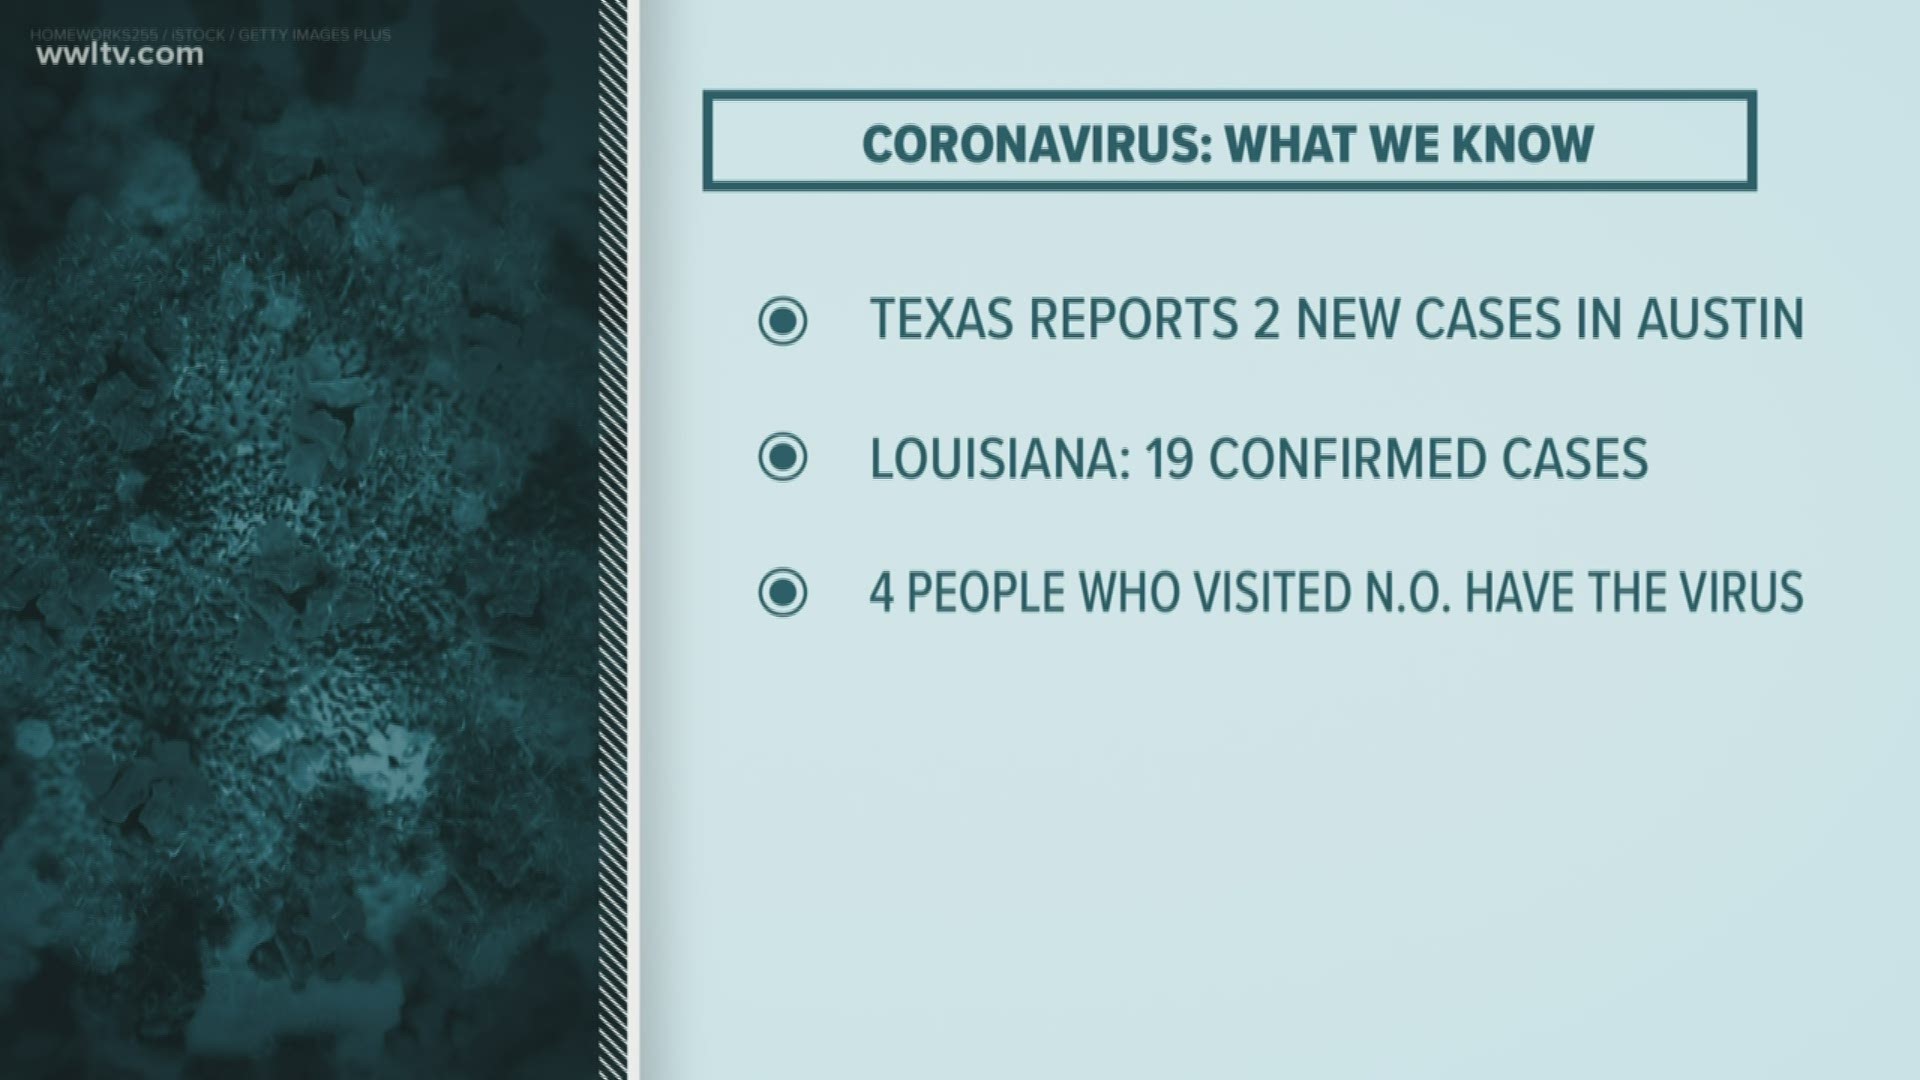 Here's the latest information on the impact of the coronavirus in Louisiana for Friday morning, March 13.